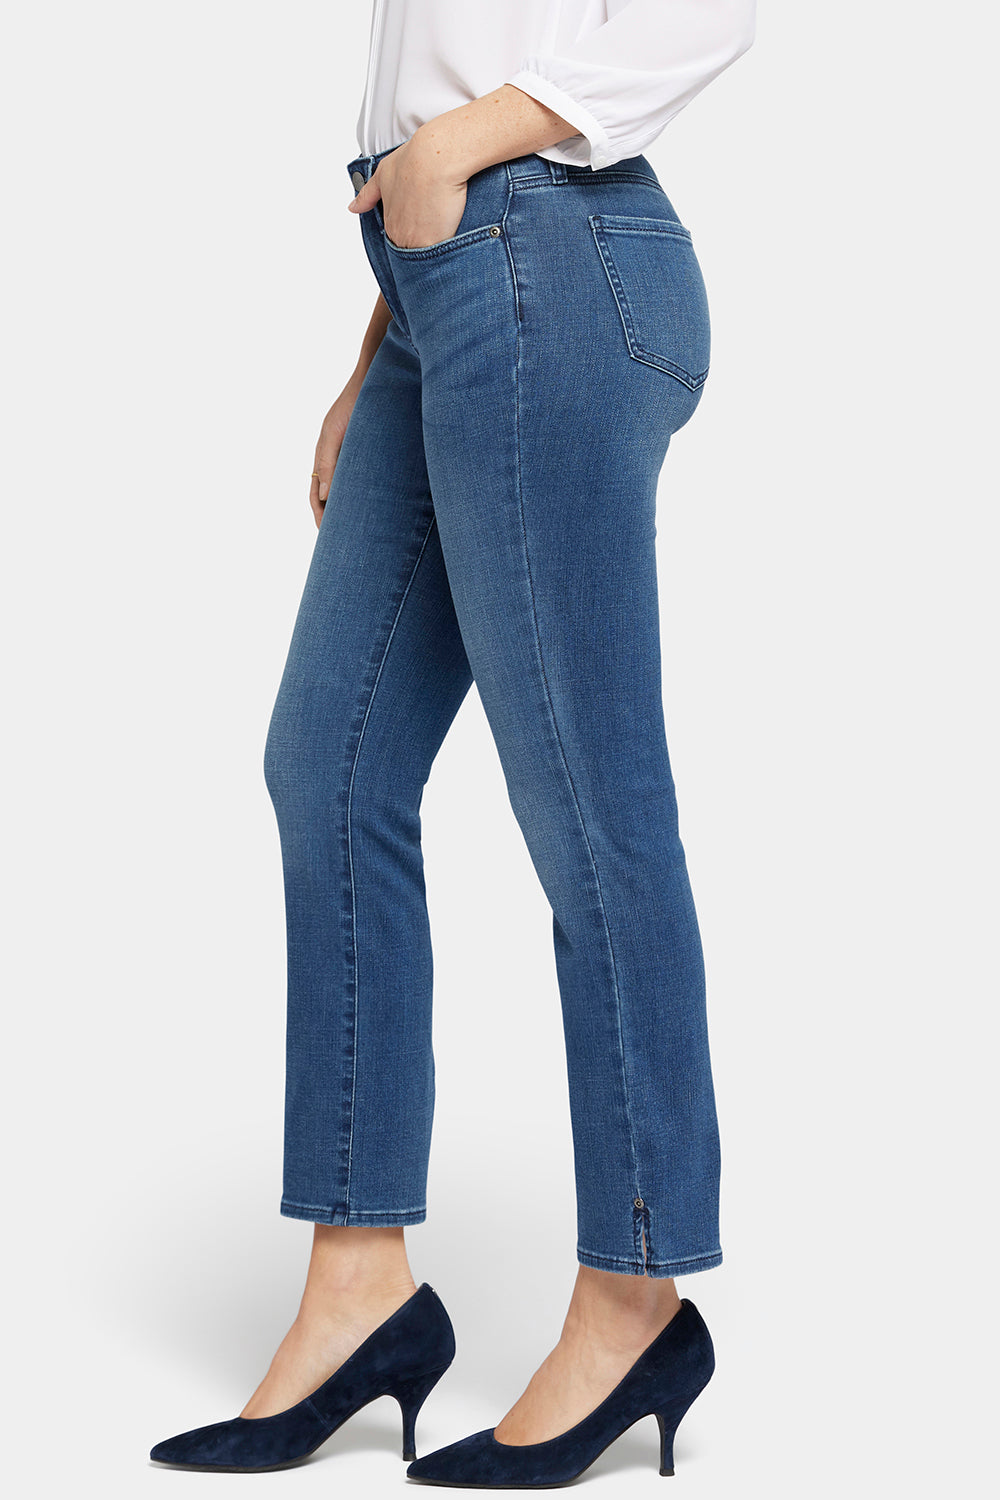 NYDJ Sheri Slim Ankle Jeans In Petite With Riveted Side Slits - Bluewell